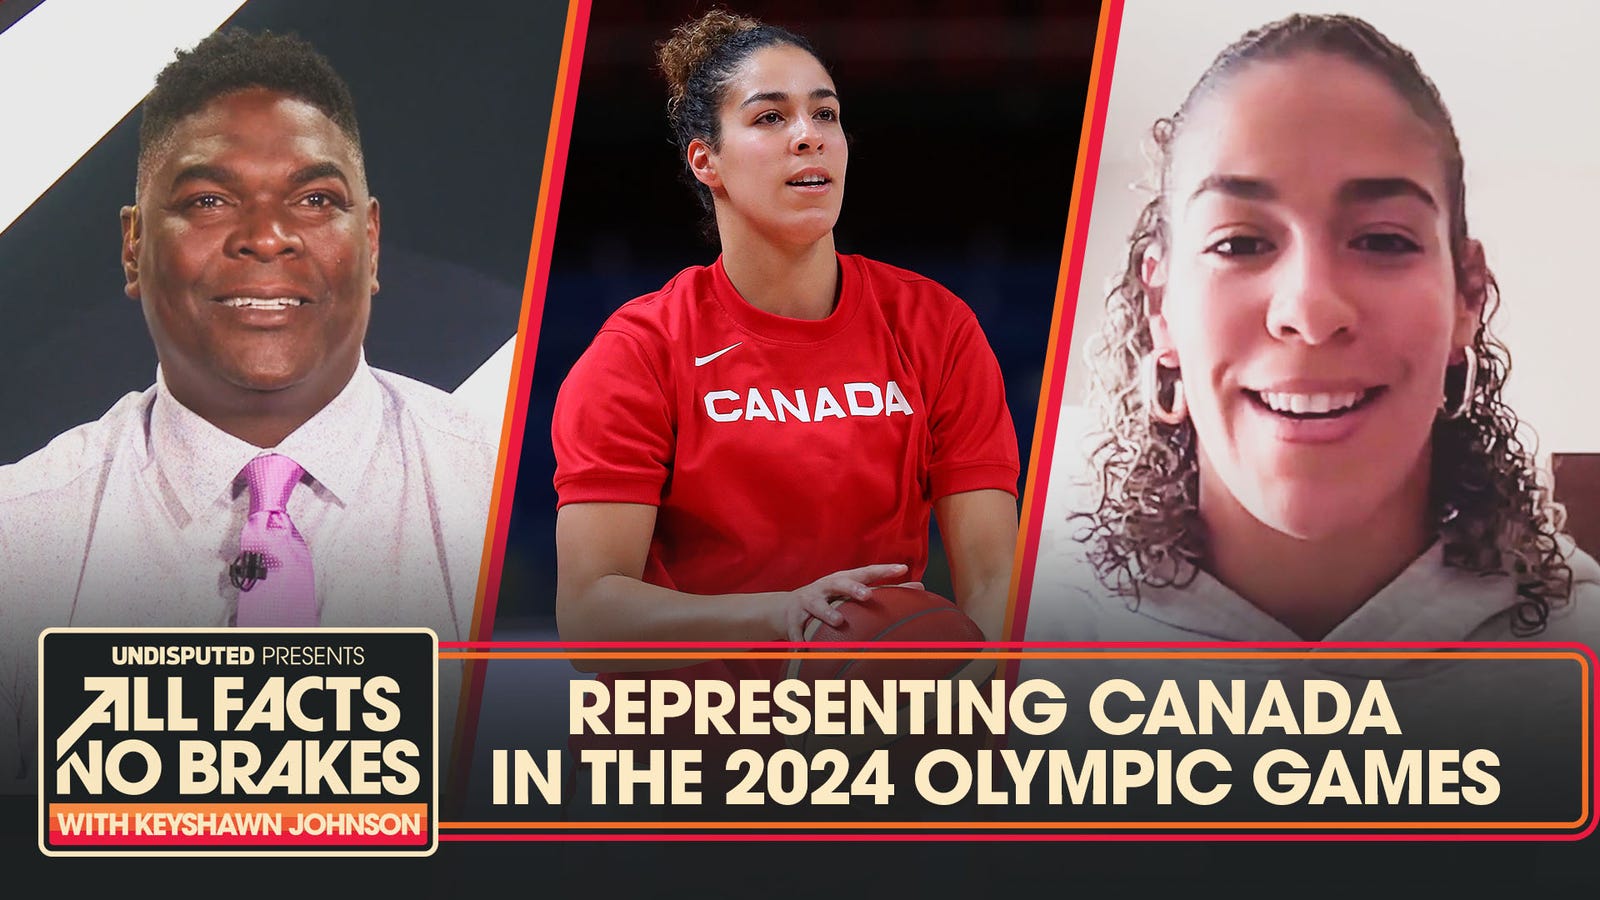 Kia Nurse on representing The Canadian National Team in the Olympics | All Facts No Brakes